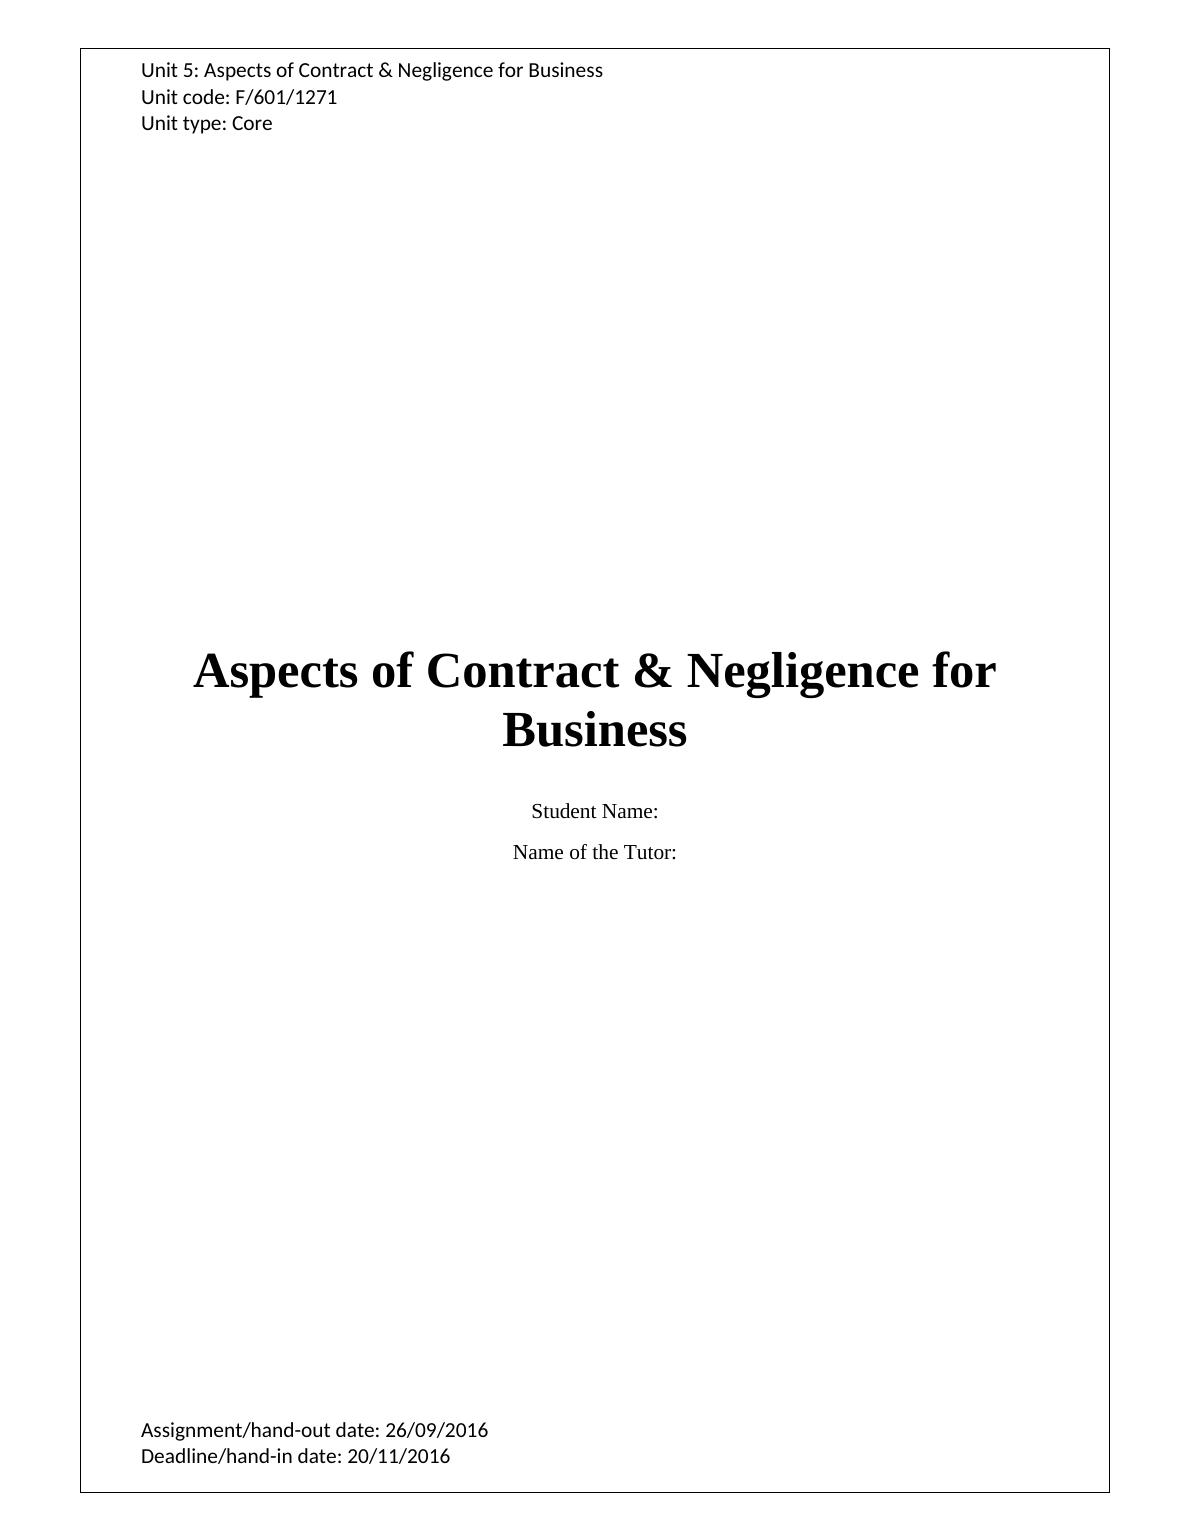 Components of Contract & Negligence For Business : Assignment_1